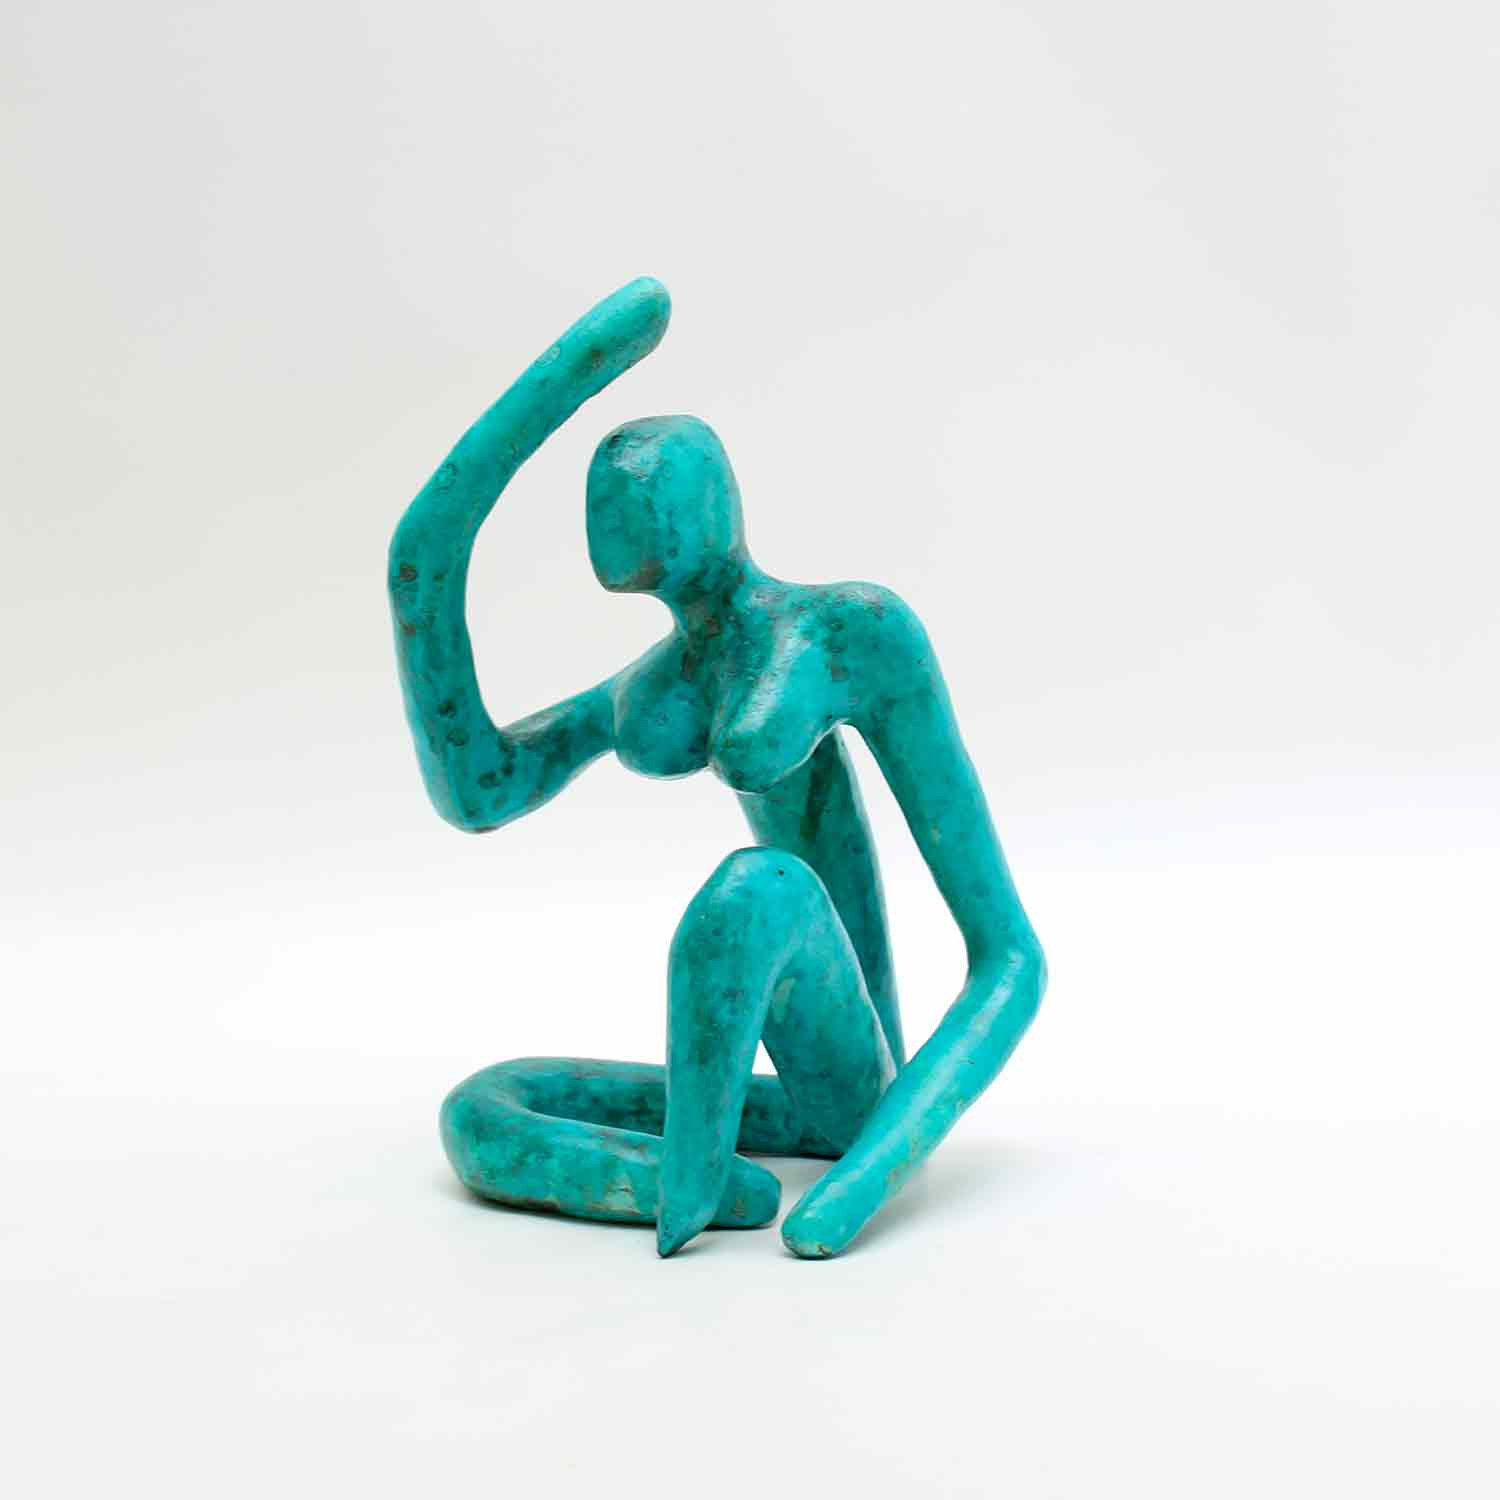 Didier Fournier, Matissette, sculpture - Artalistic online contemporary art buying and selling gallery